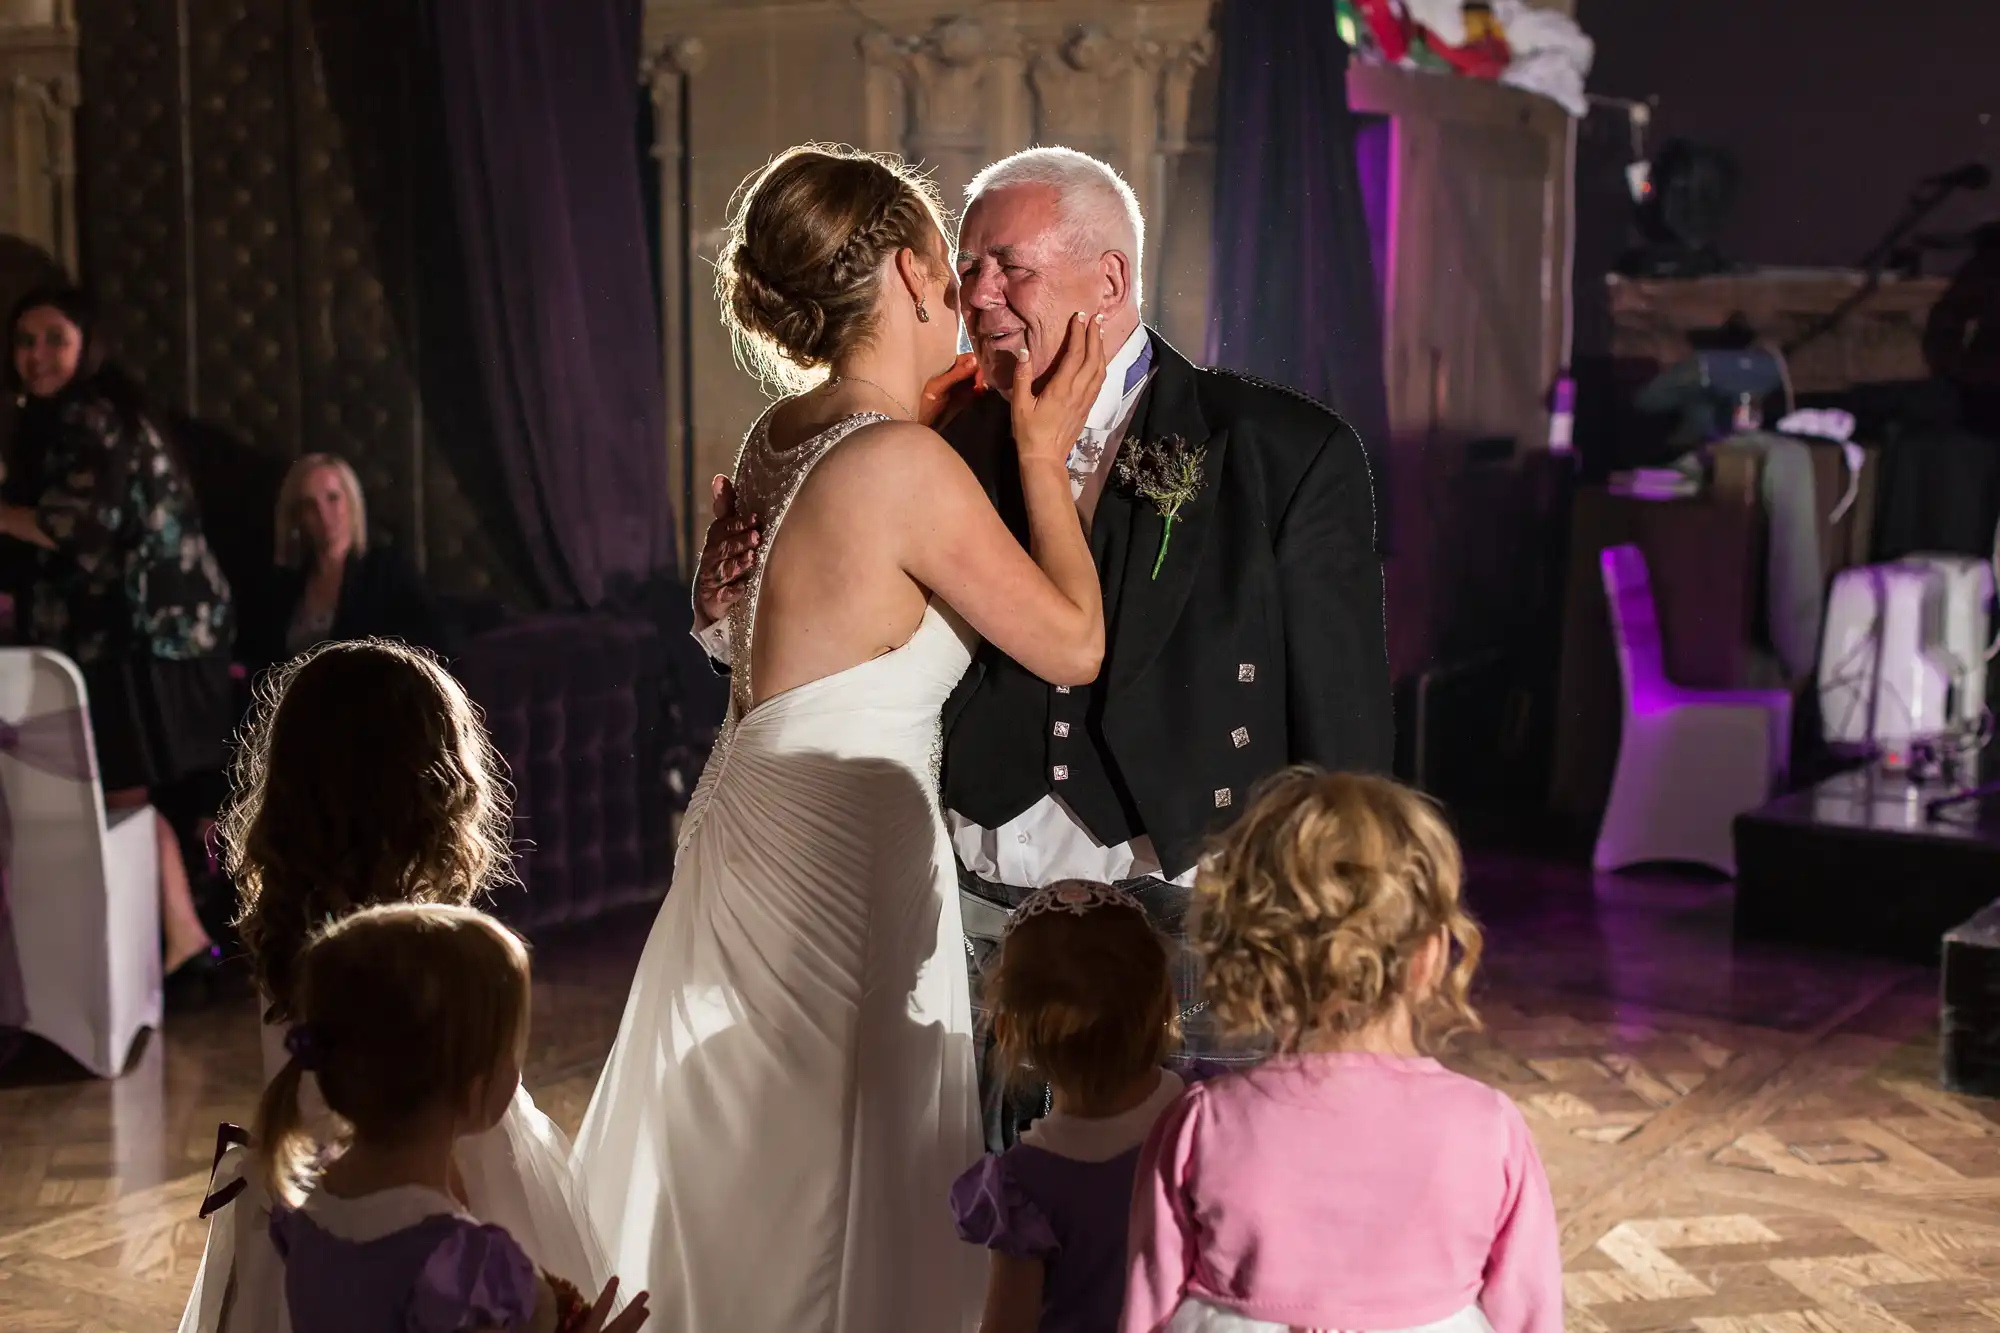 A bride touches the face of an elderly man, both smiling, surrounded by children at a wedding reception.